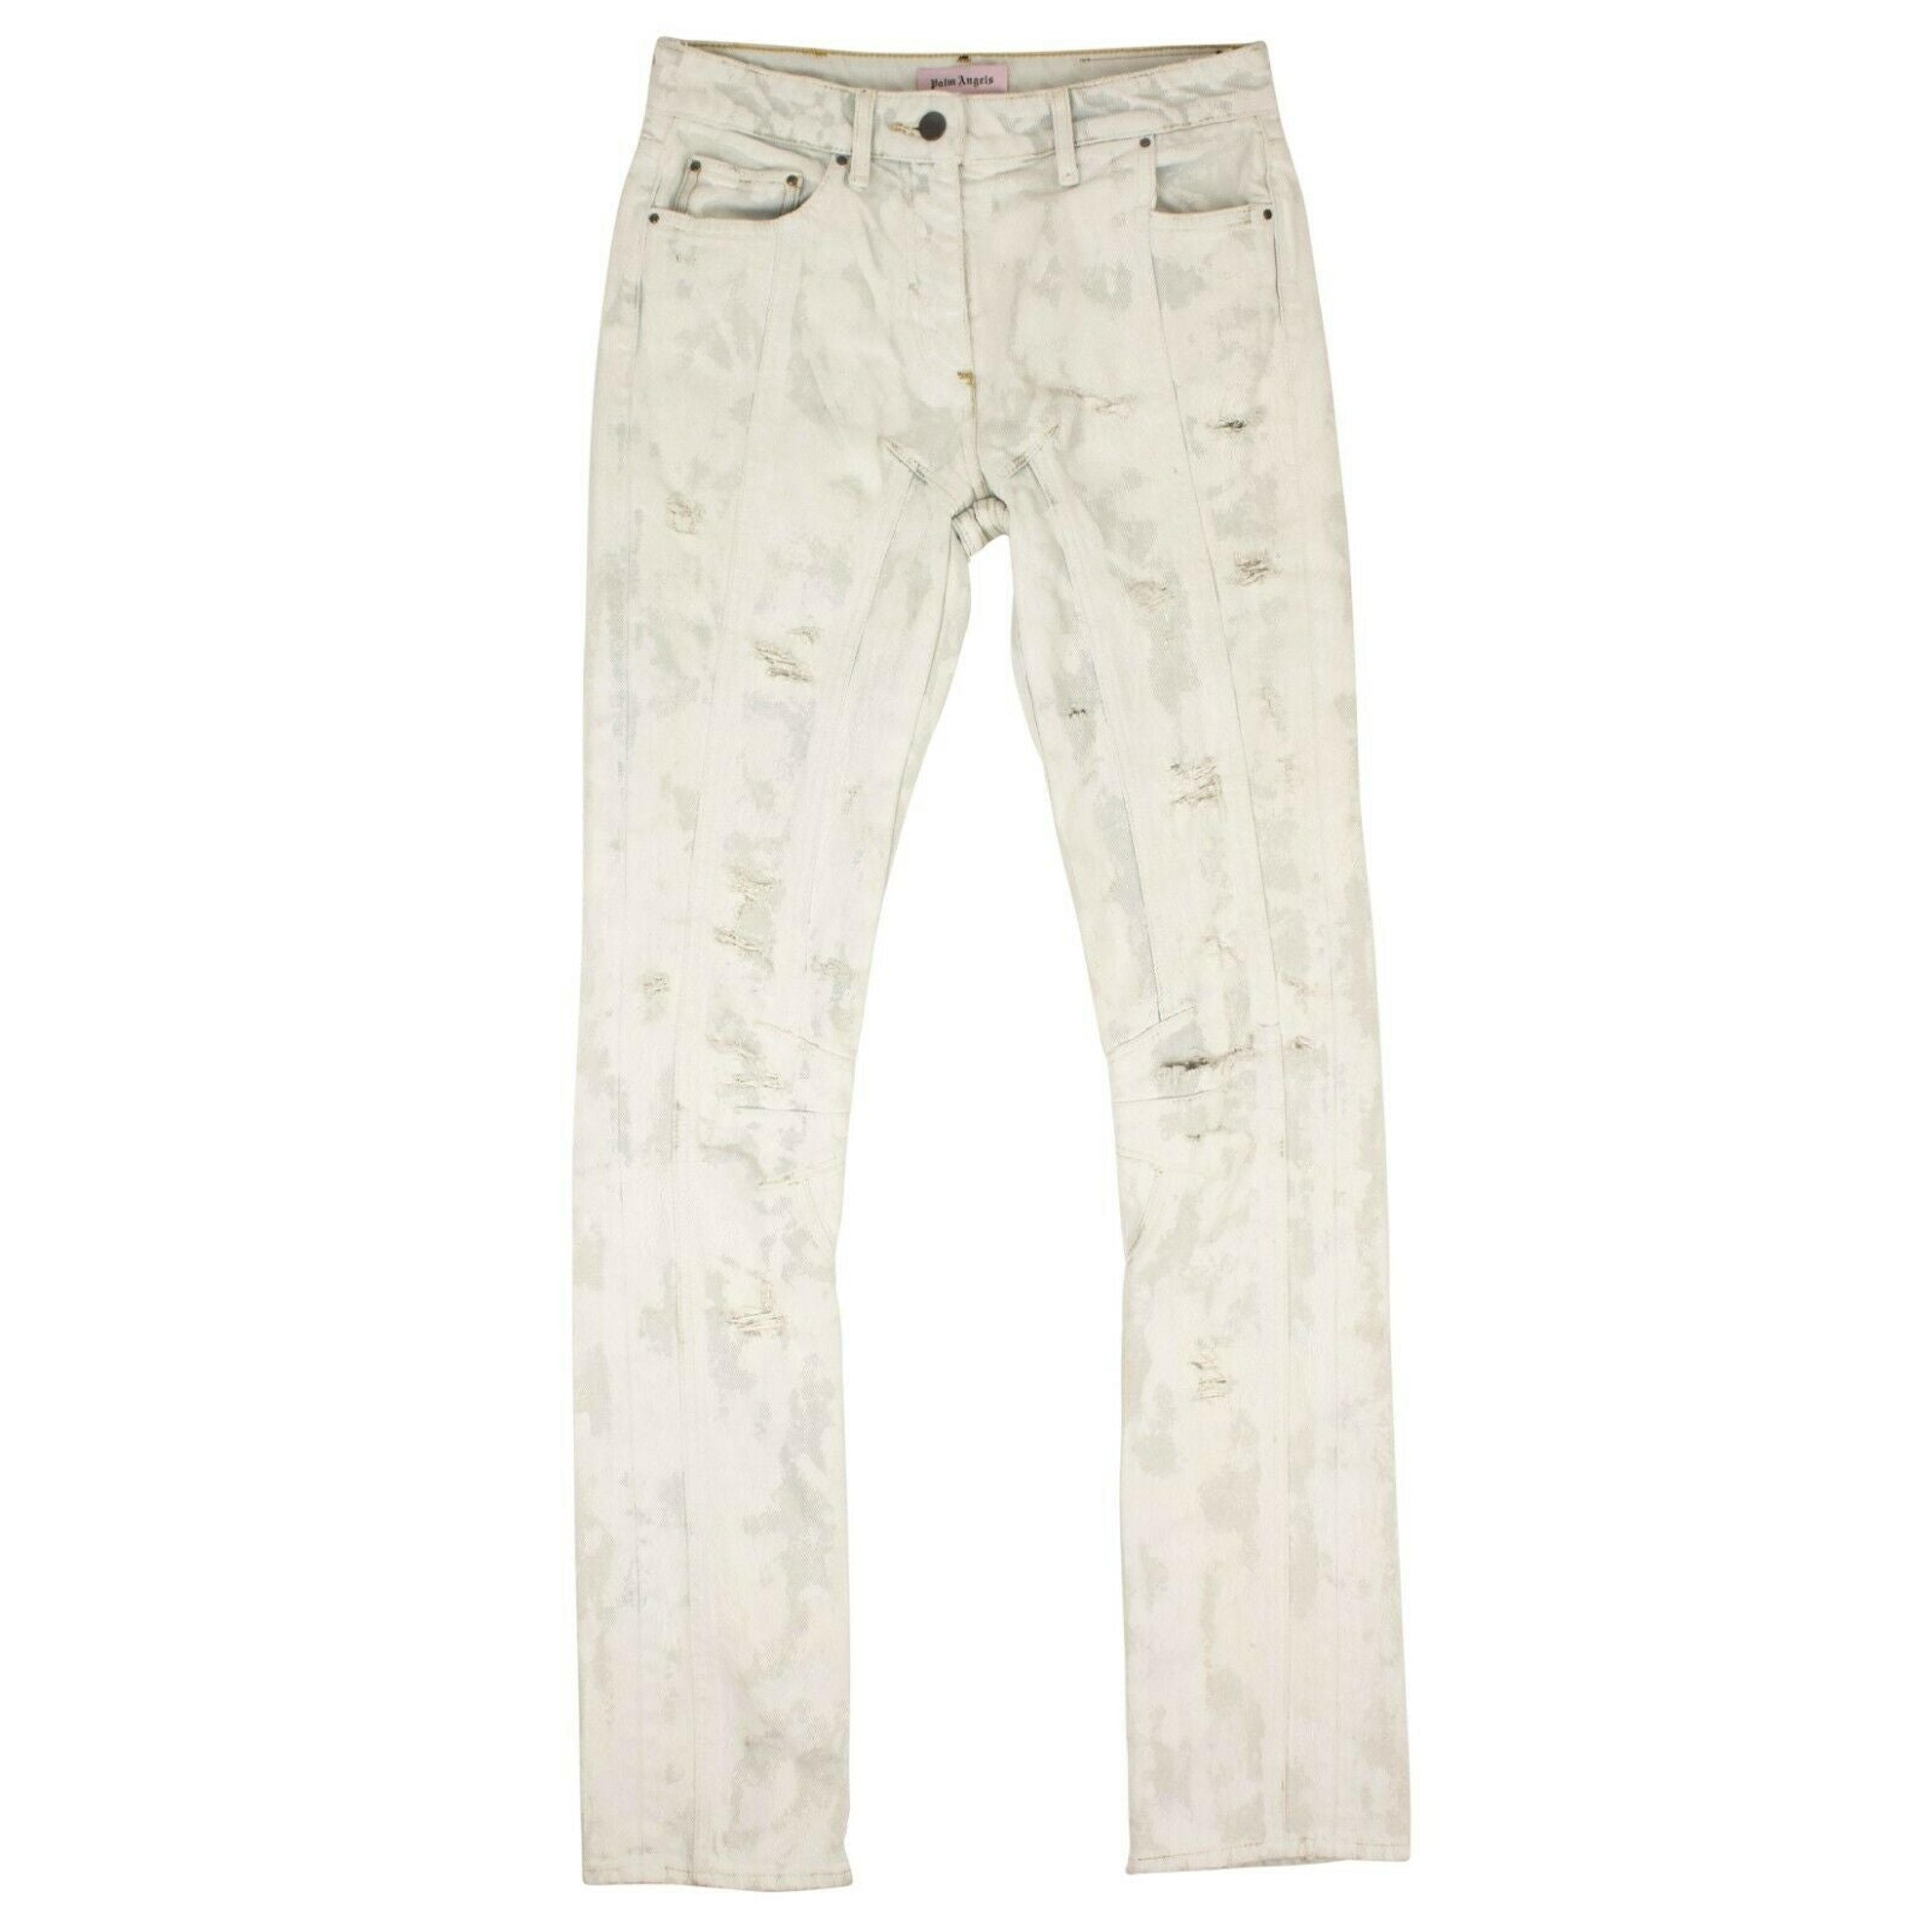 Women's Blue And White Tie Dye Distressed Jeans